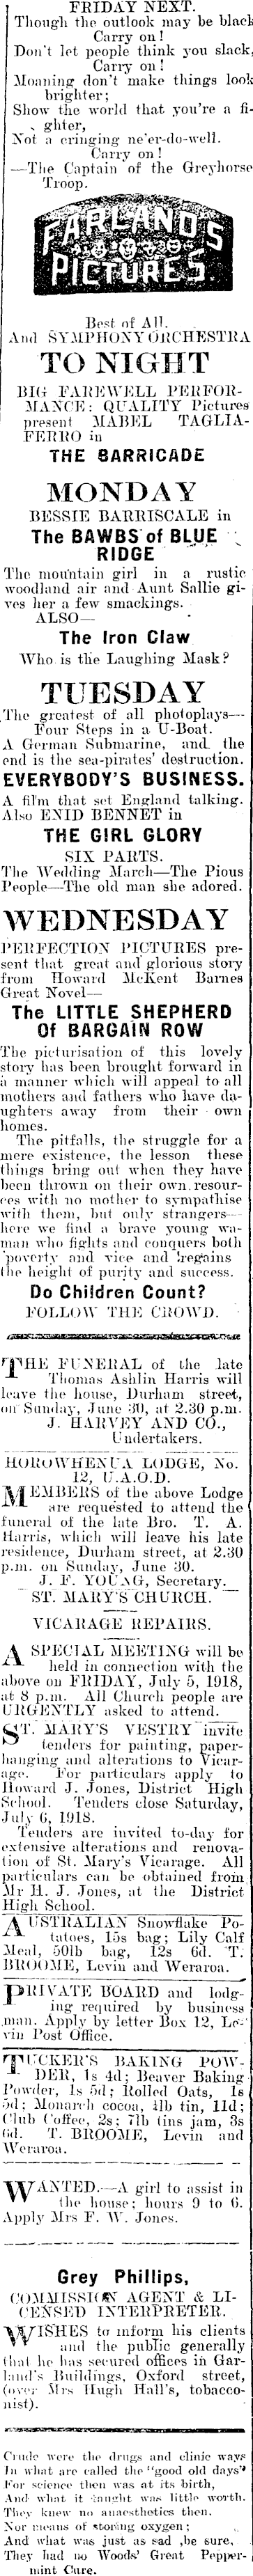 Papers Past | Newspapers | Horowhenua Chronicle | 29 June 1918 | Page 3 Advertisements